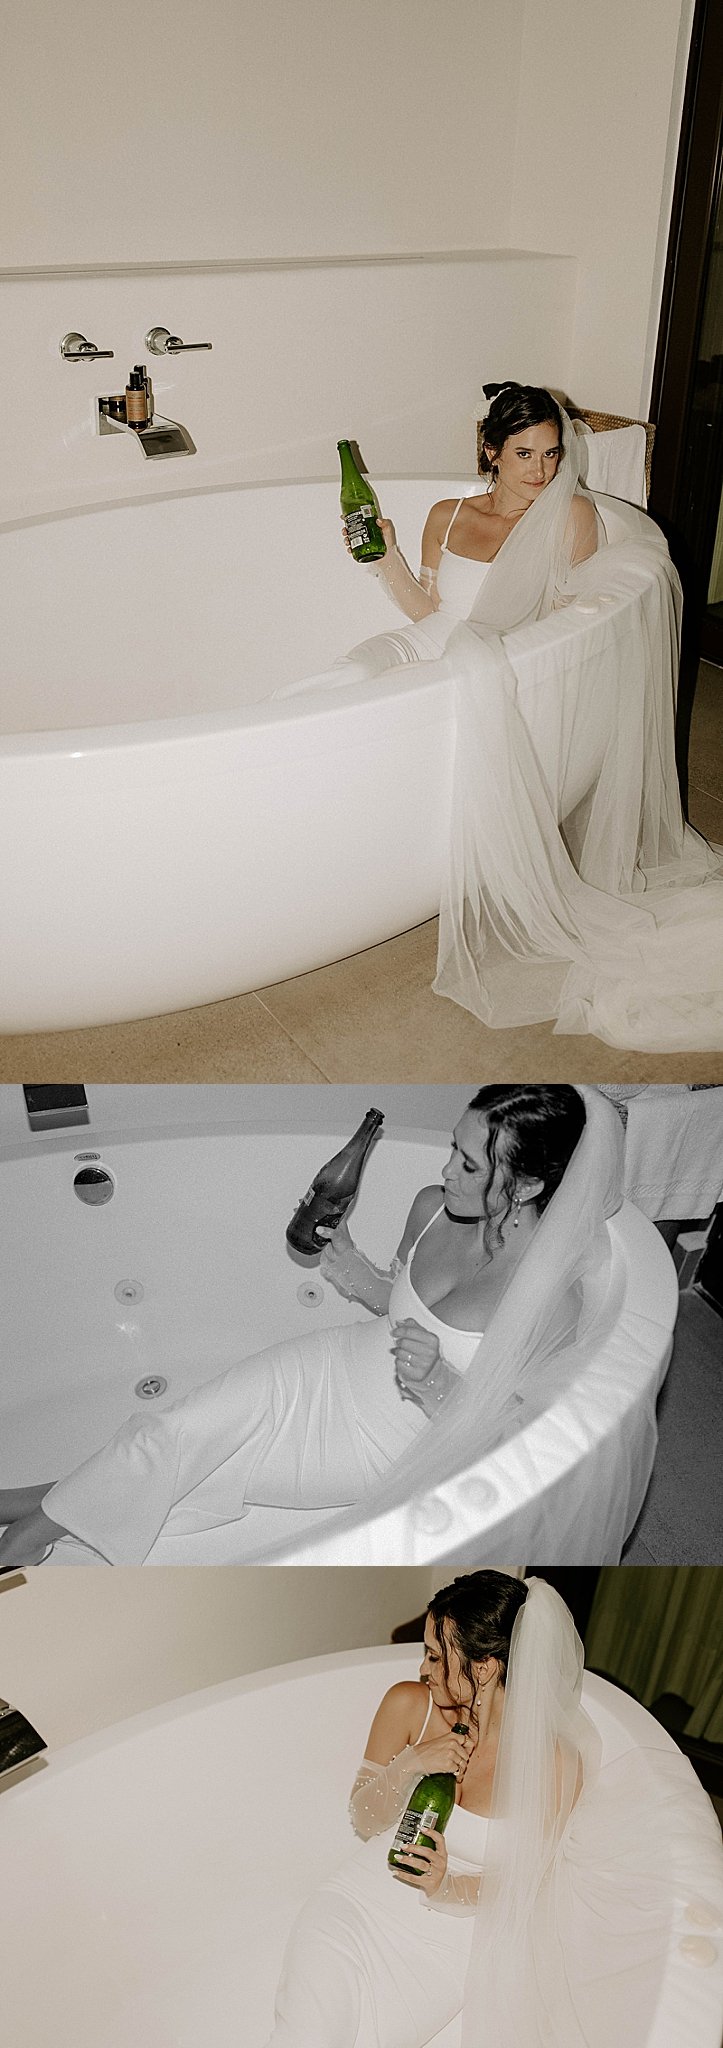  Bride drinks champagne in tub by Michigan wedding photographer 